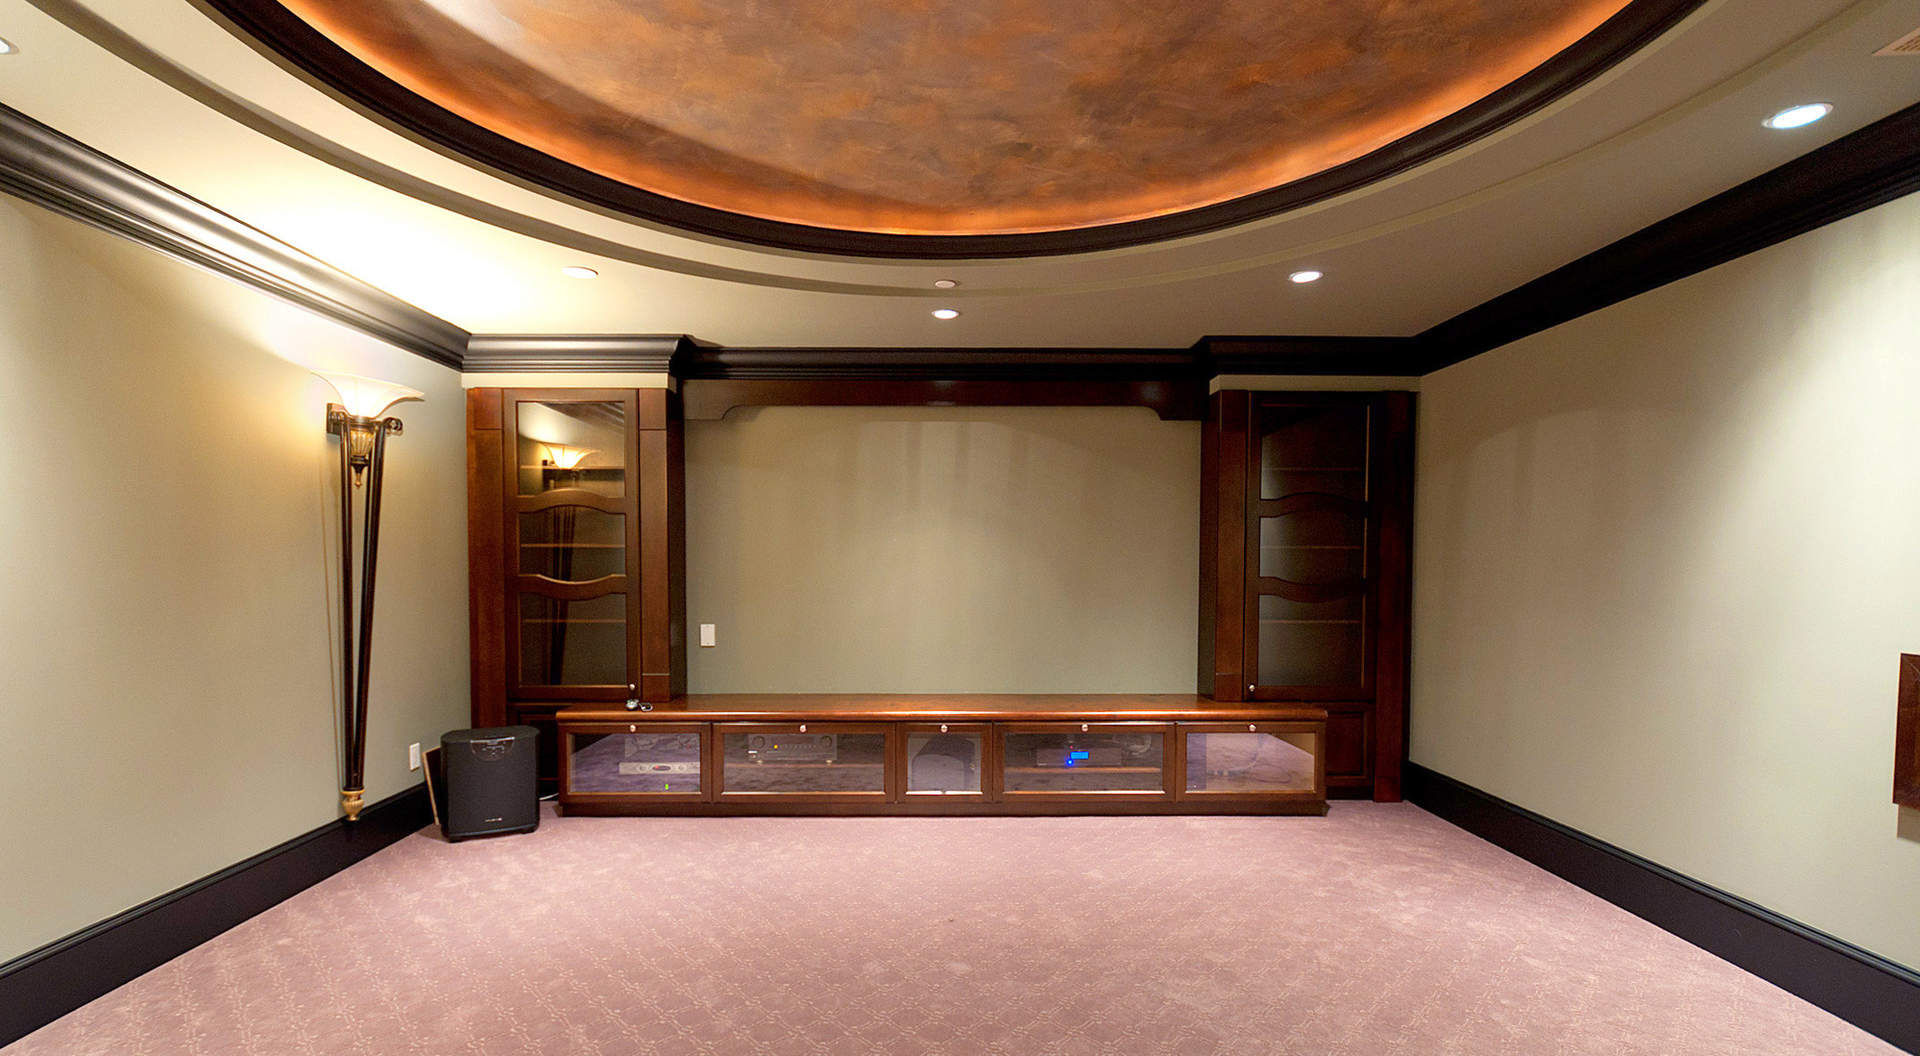 State-of-the Art Theatre Room